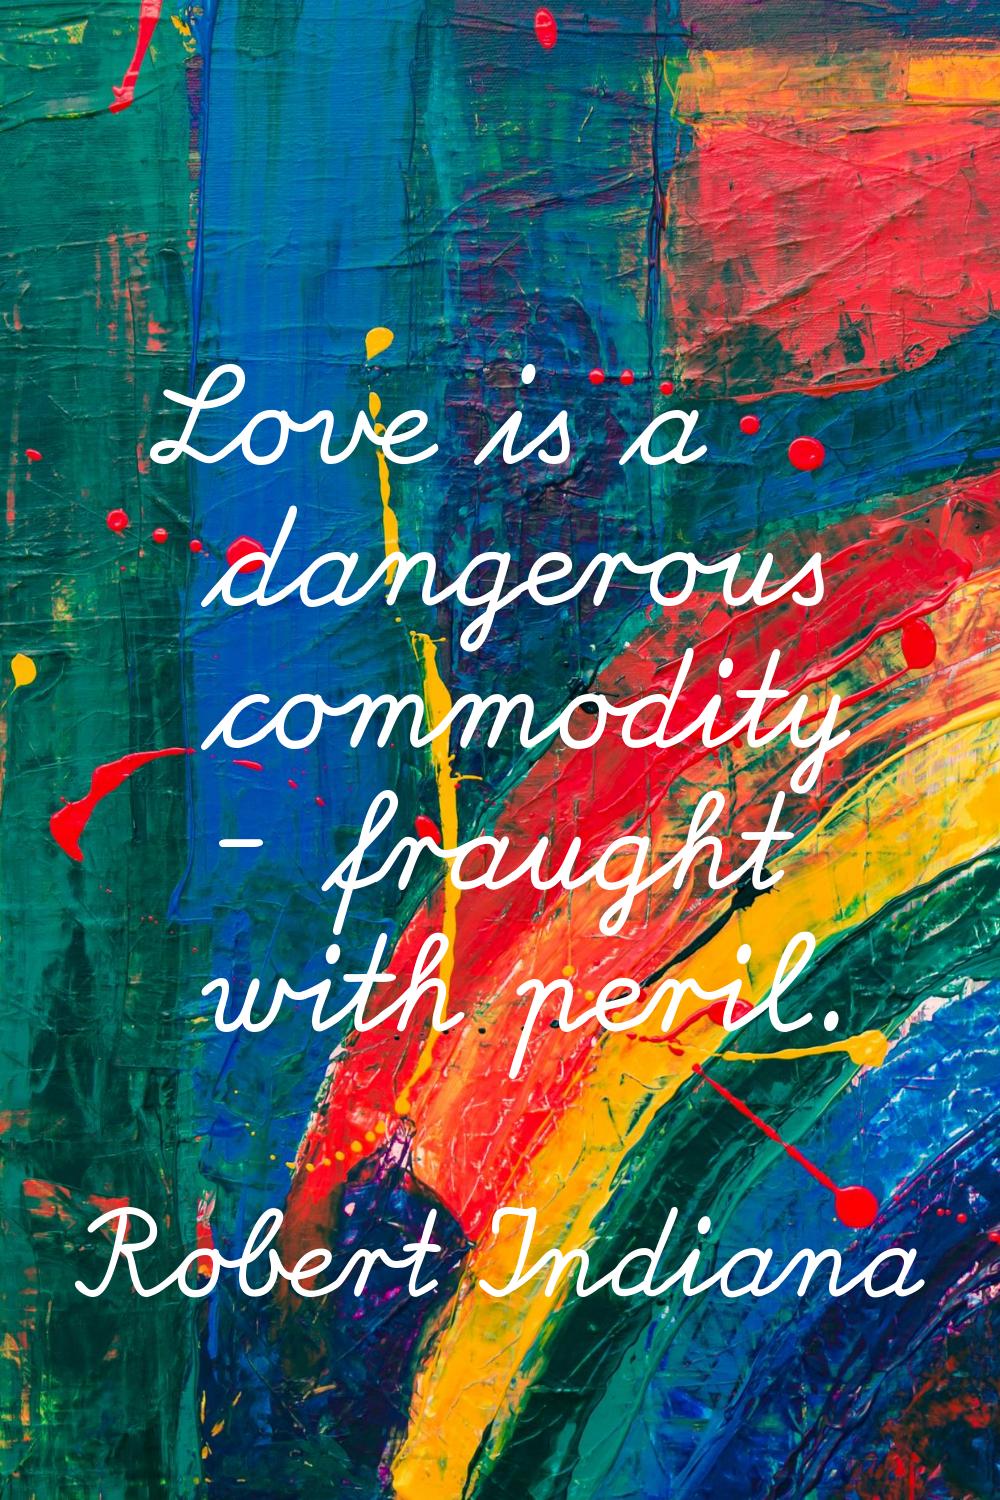 Love is a dangerous commodity - fraught with peril.